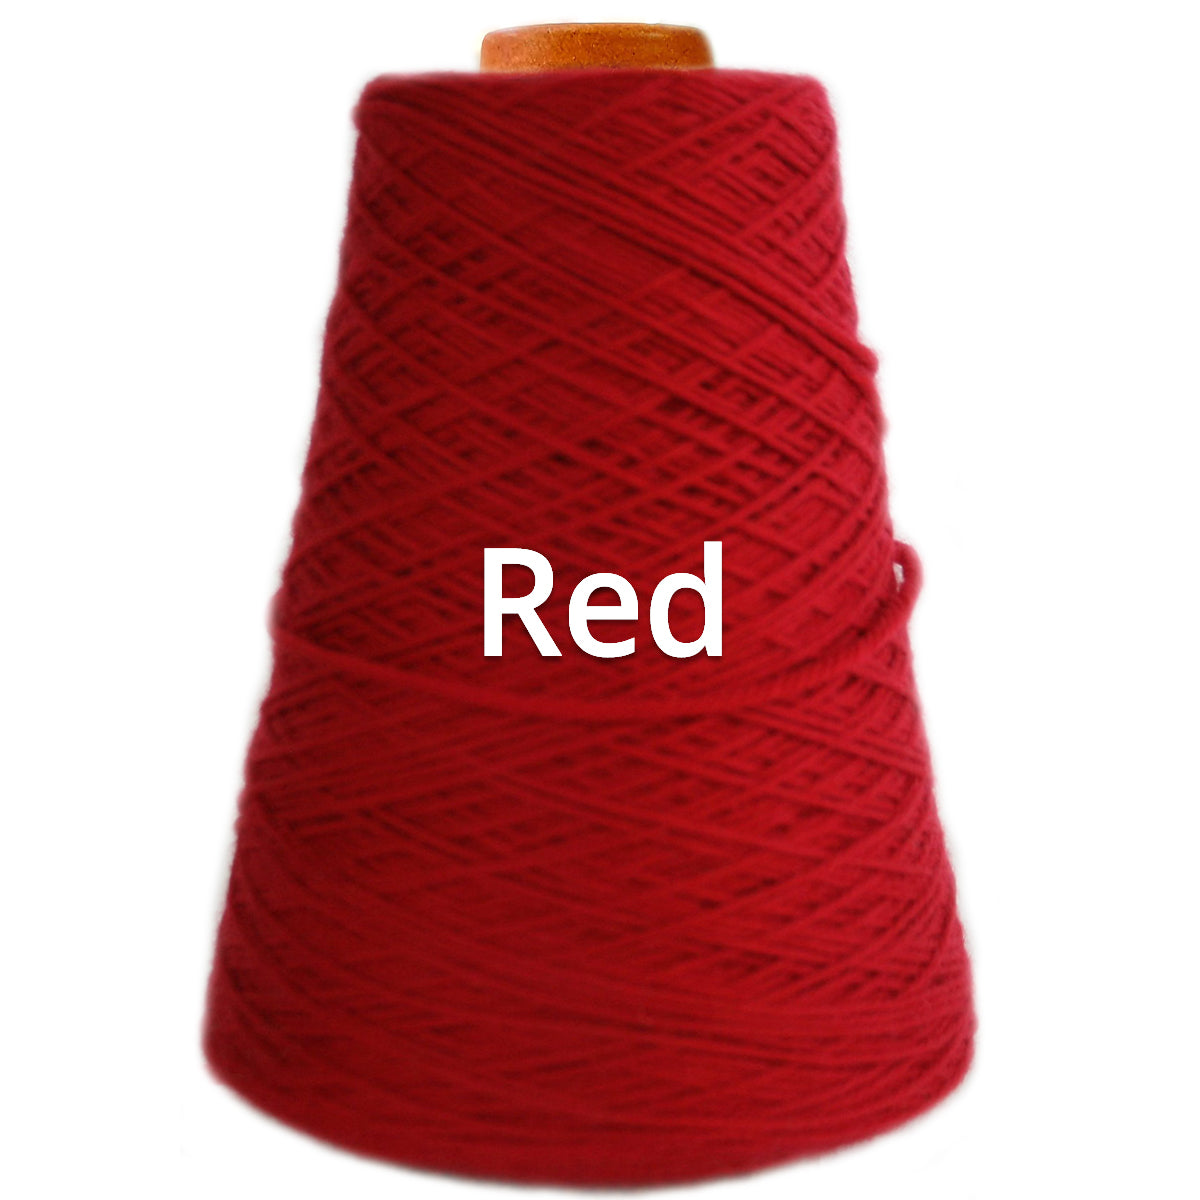 Red - Nundle Collection - 4 Ply Sock Yarn 400g Cone